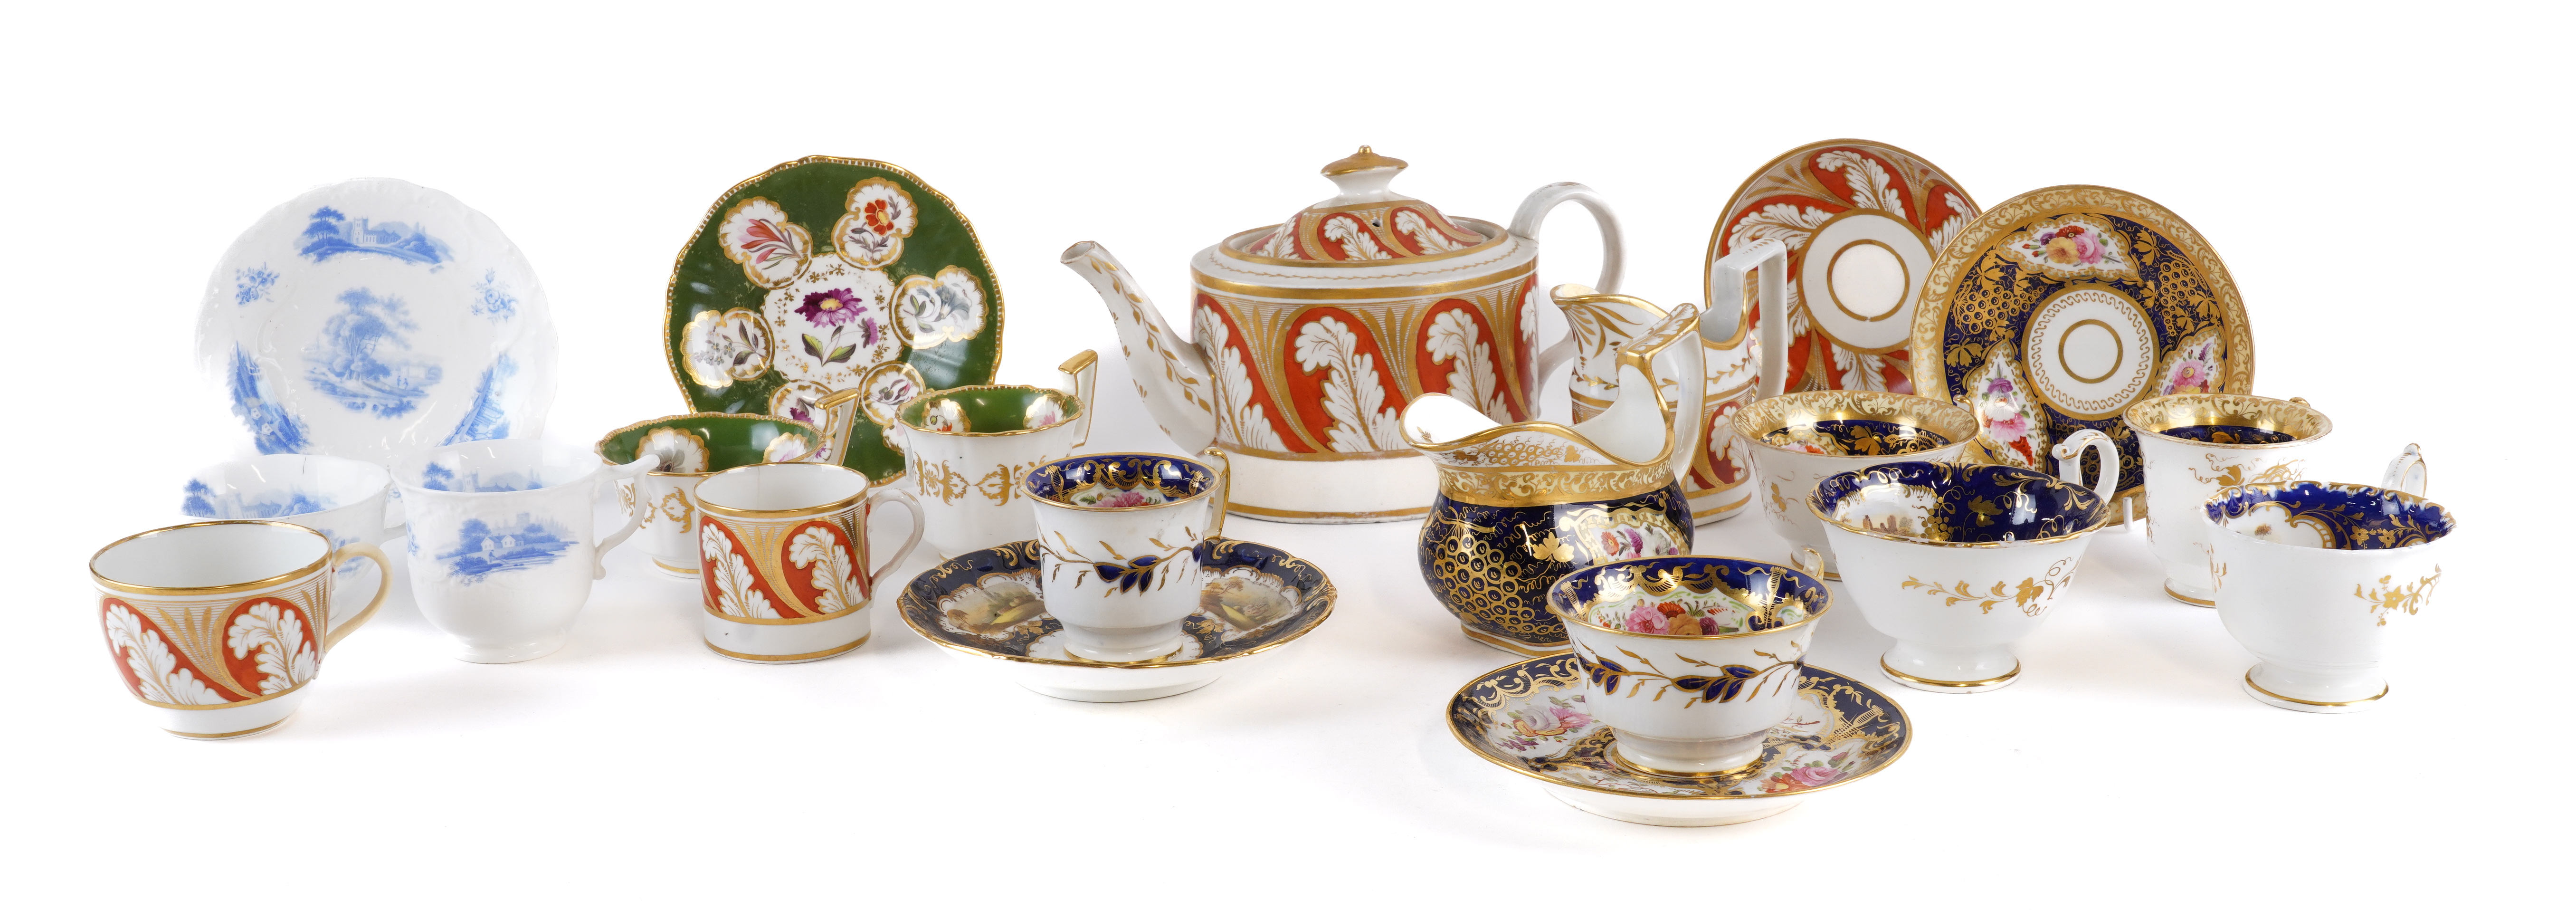 A GROUP OF ENGLISH PORCELAIN TEA AND COFFEE WARES